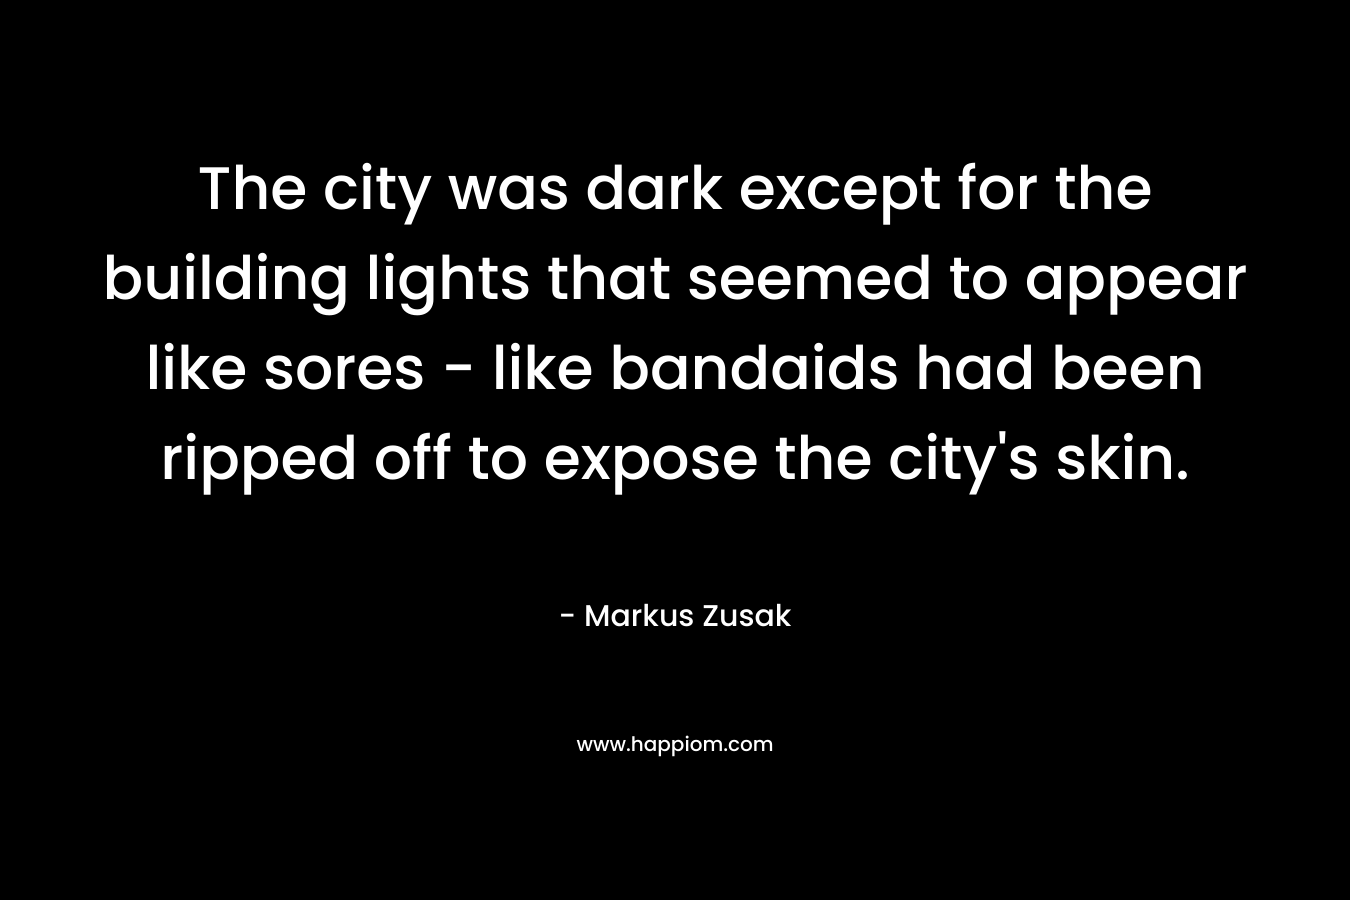 The city was dark except for the building lights that seemed to appear like sores – like bandaids had been ripped off to expose the city’s skin. – Markus Zusak